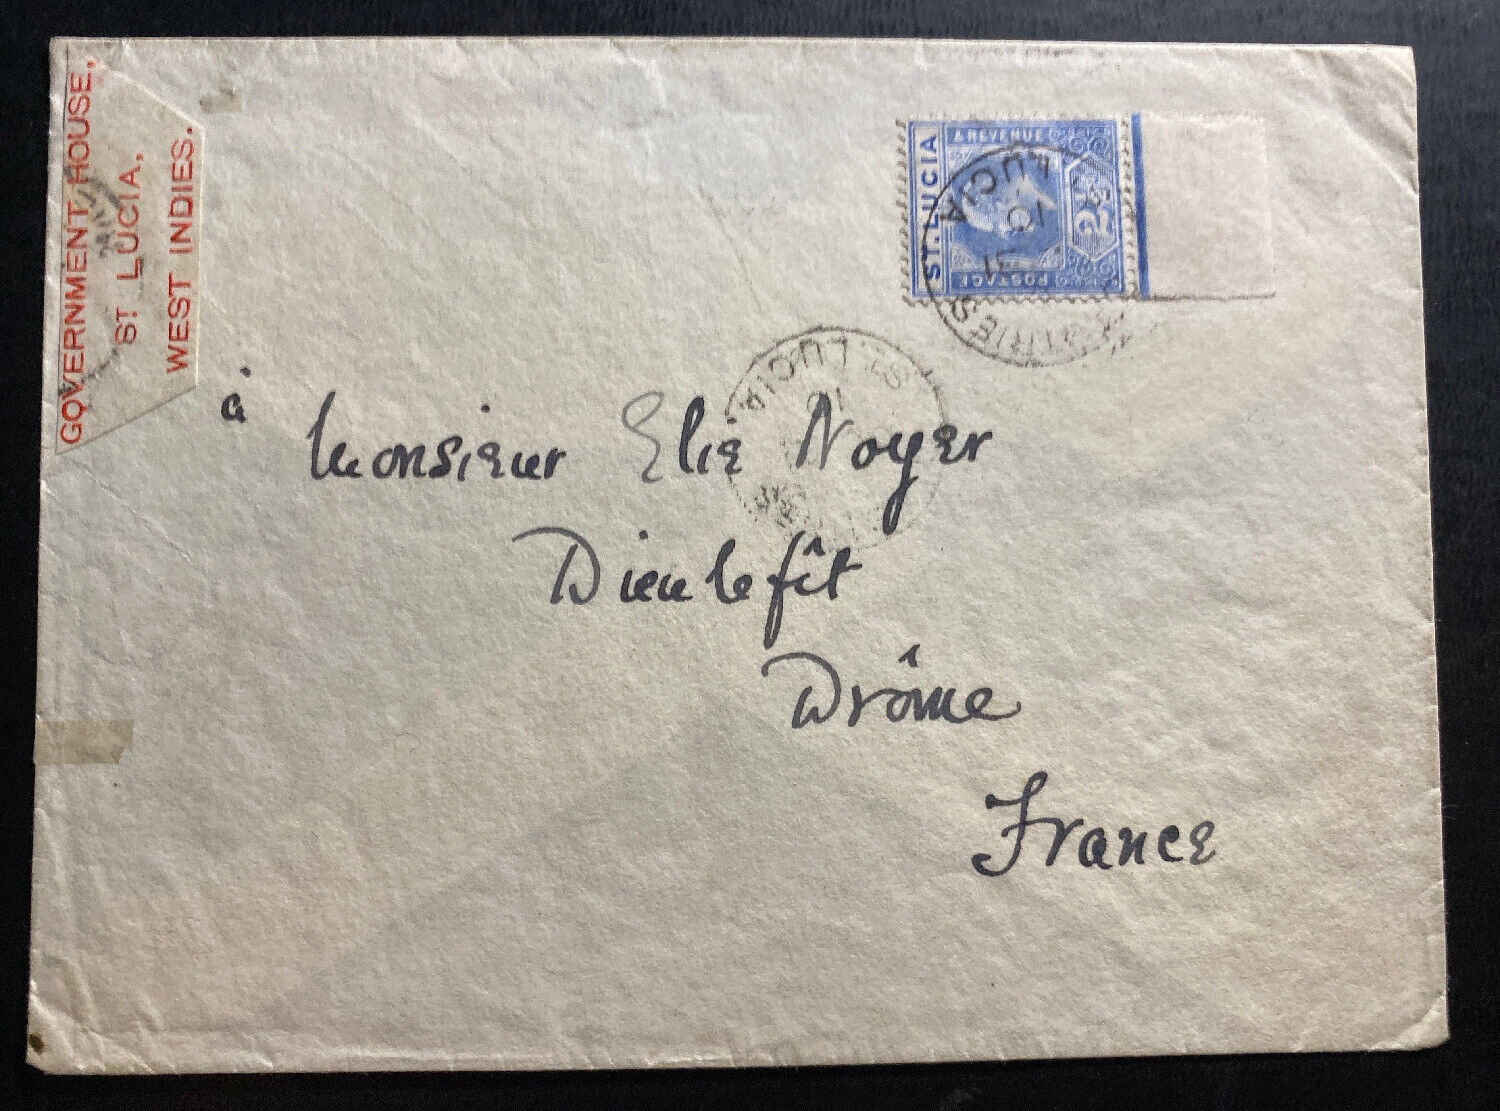 1910 Castries St Lucia Government House Cover  To Drone France